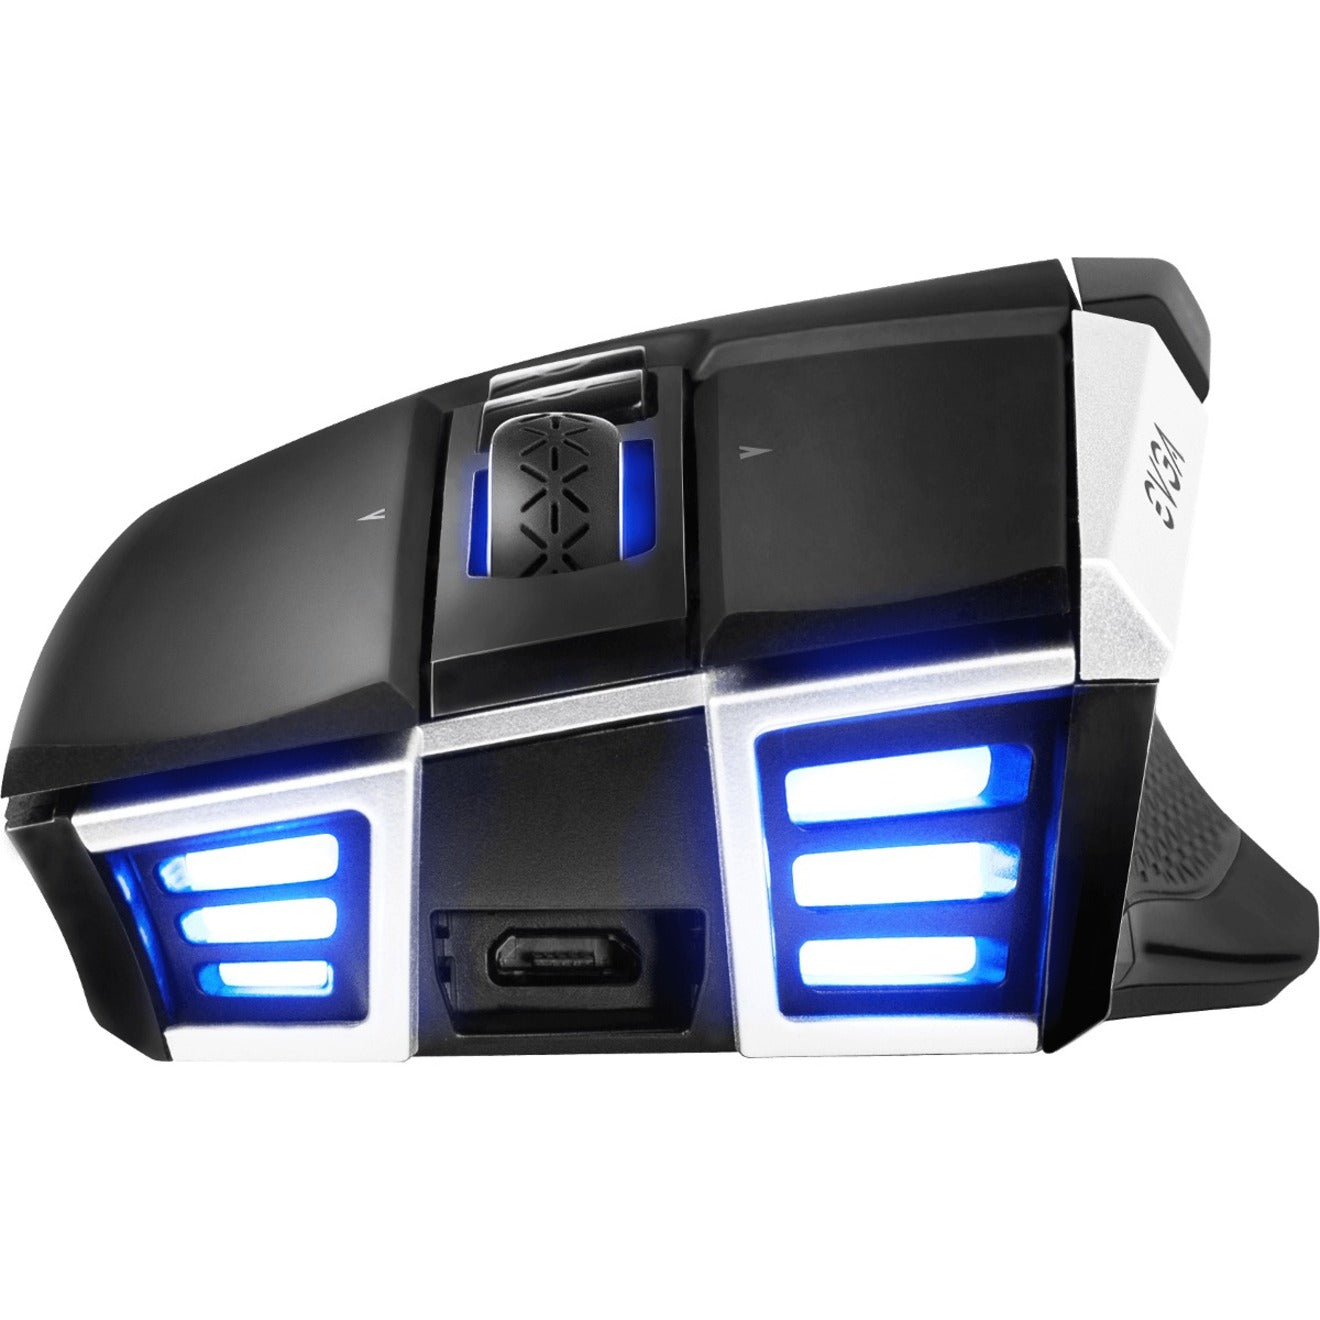 EVGA 903-T1-20BK-KR X20 Gaming Mouse, 10 Buttons, 16000 dpi, Bluetooth